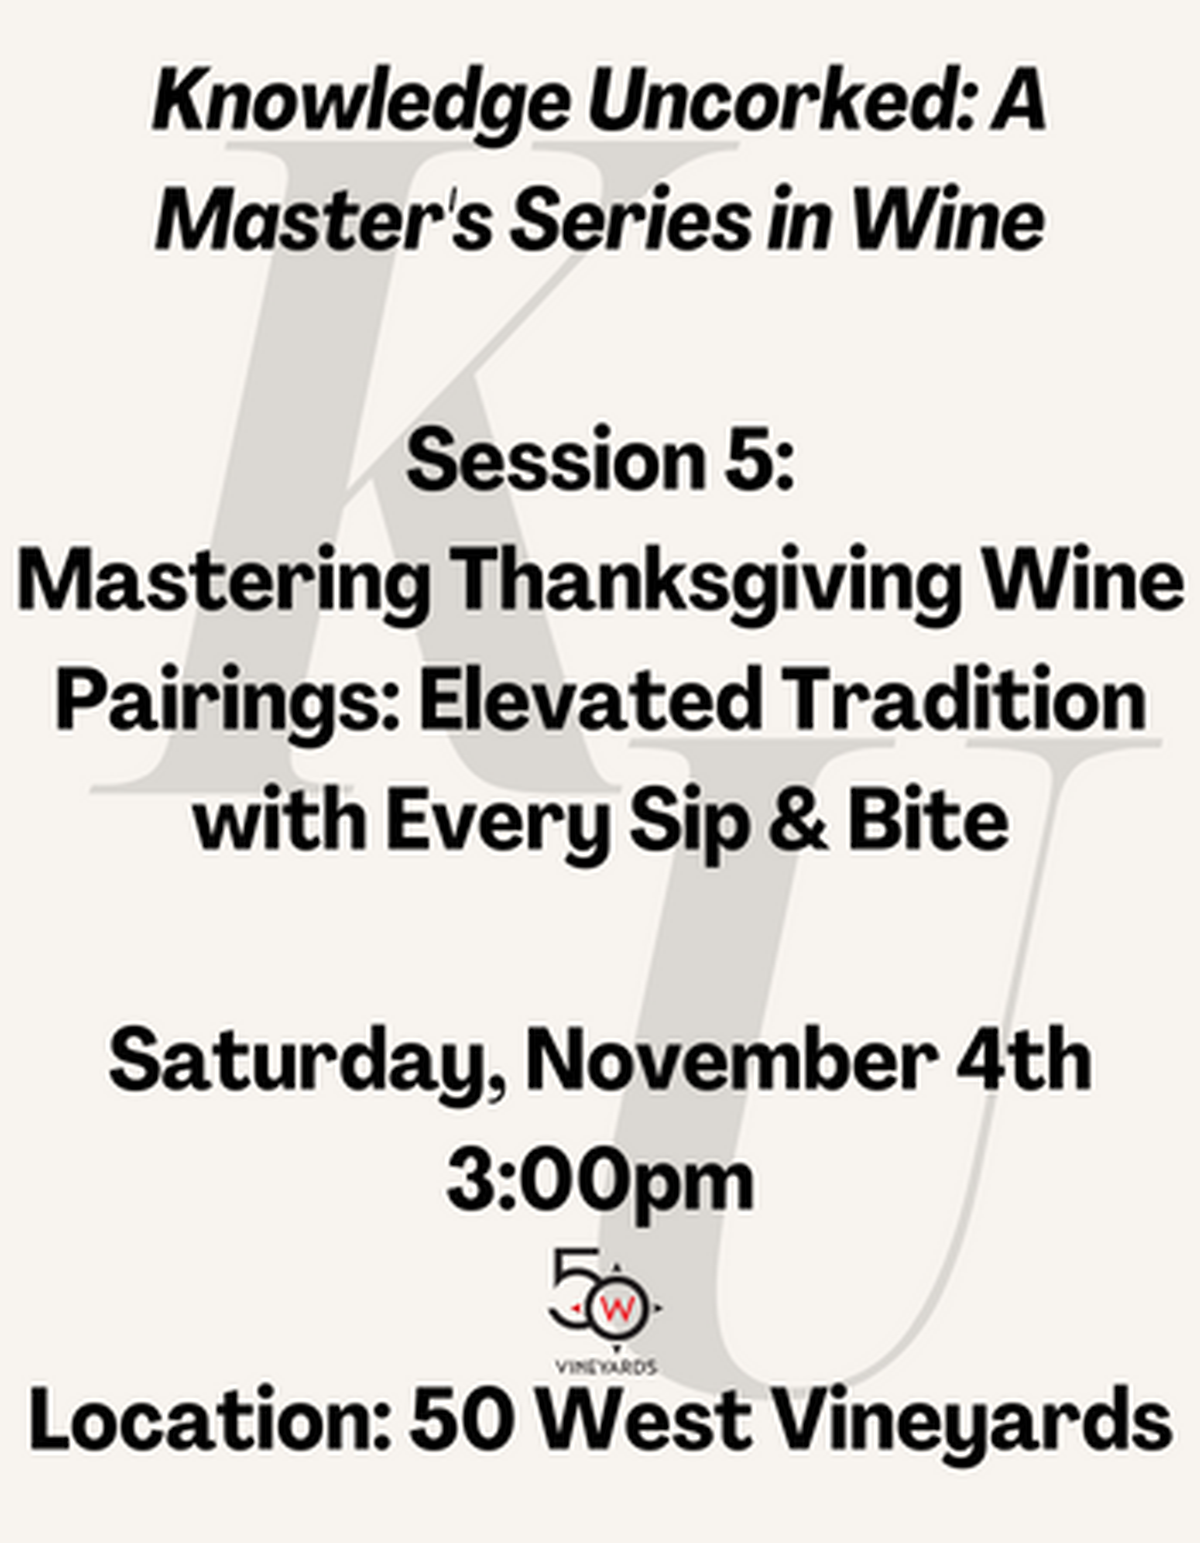 Mastering Thanksgiving Wine Pairings: Elevated Tradition with Every Sip & Bite (3:00pm)